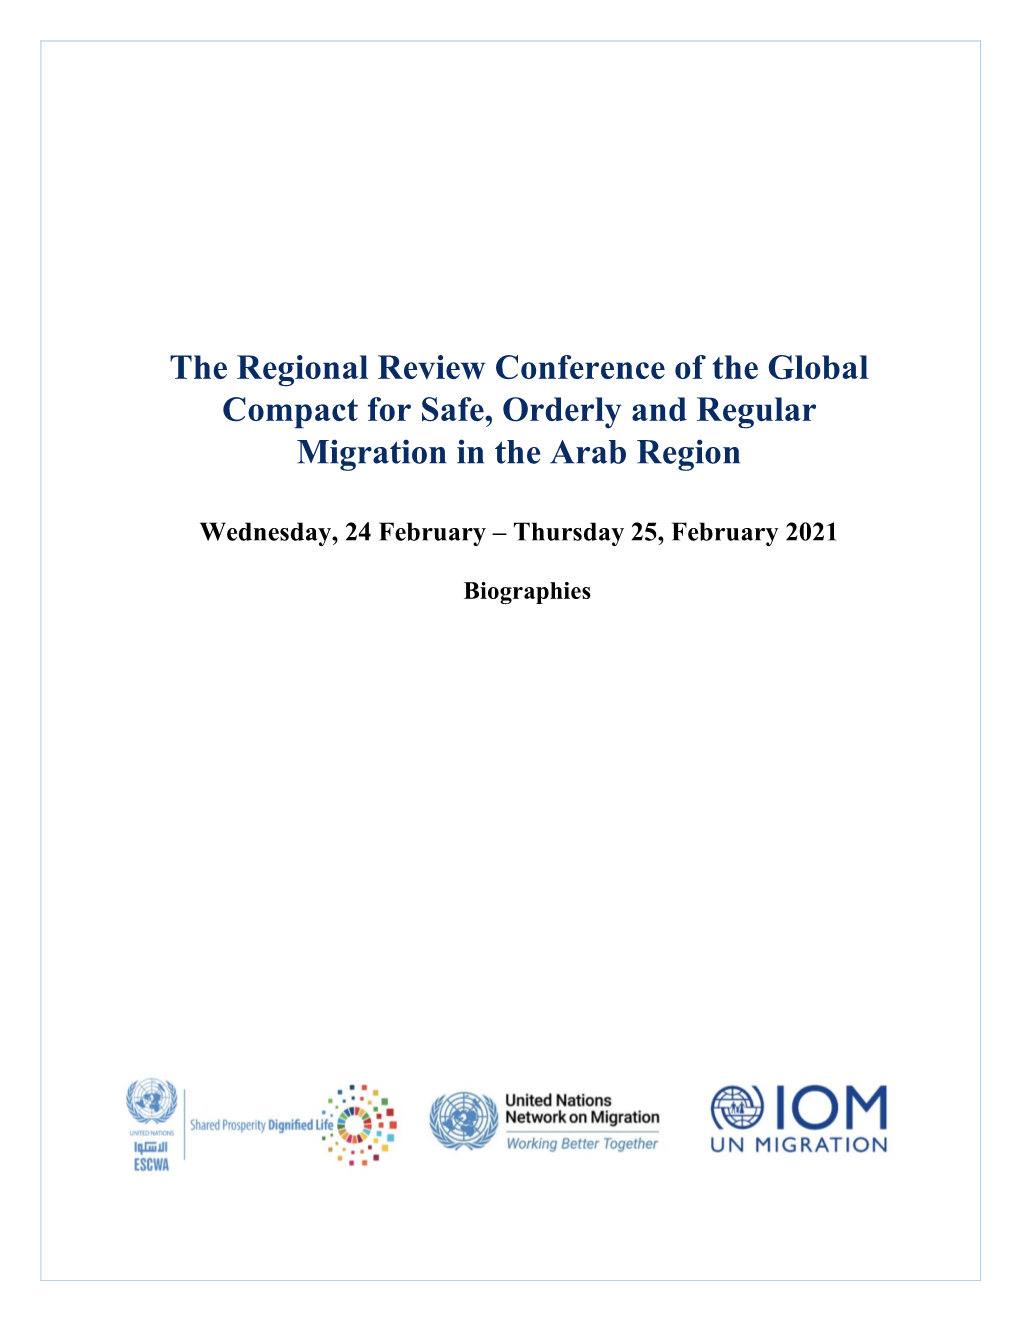 The Regional Review Conference of the Global Compact for Safe, Orderly and Regular Migration in the Arab Region